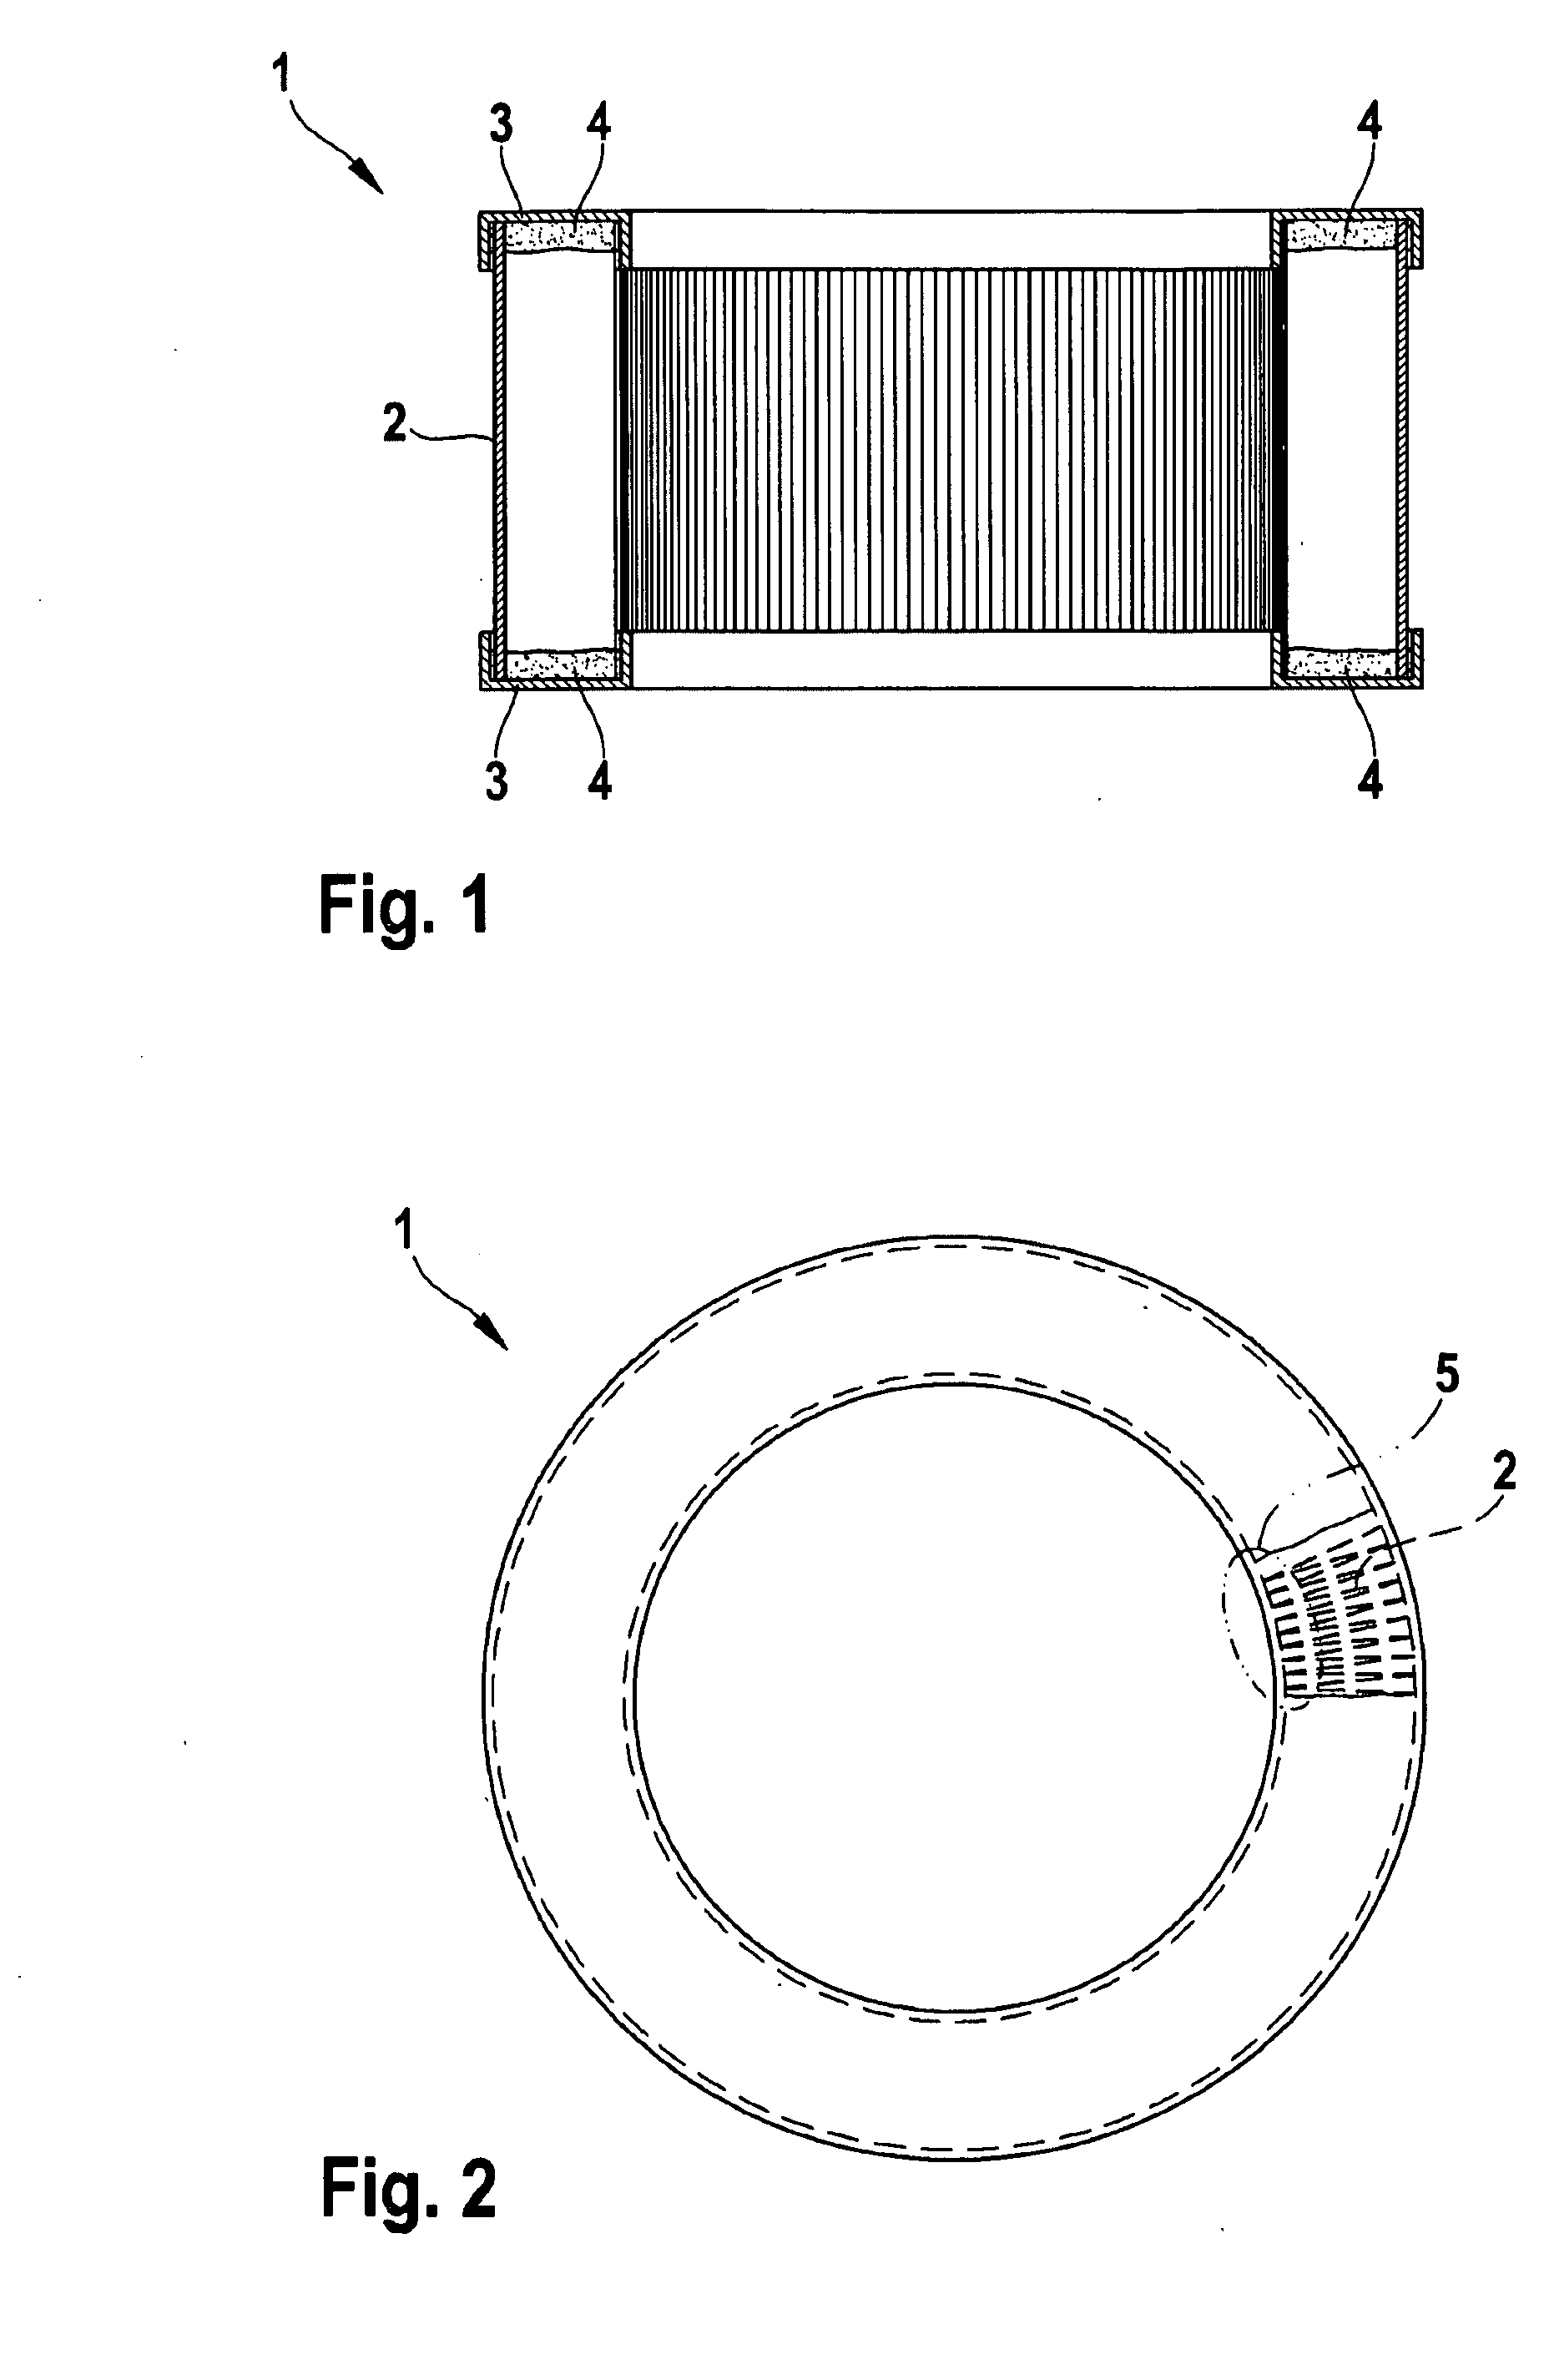 Filter Element with Glued-On Terminal Disk